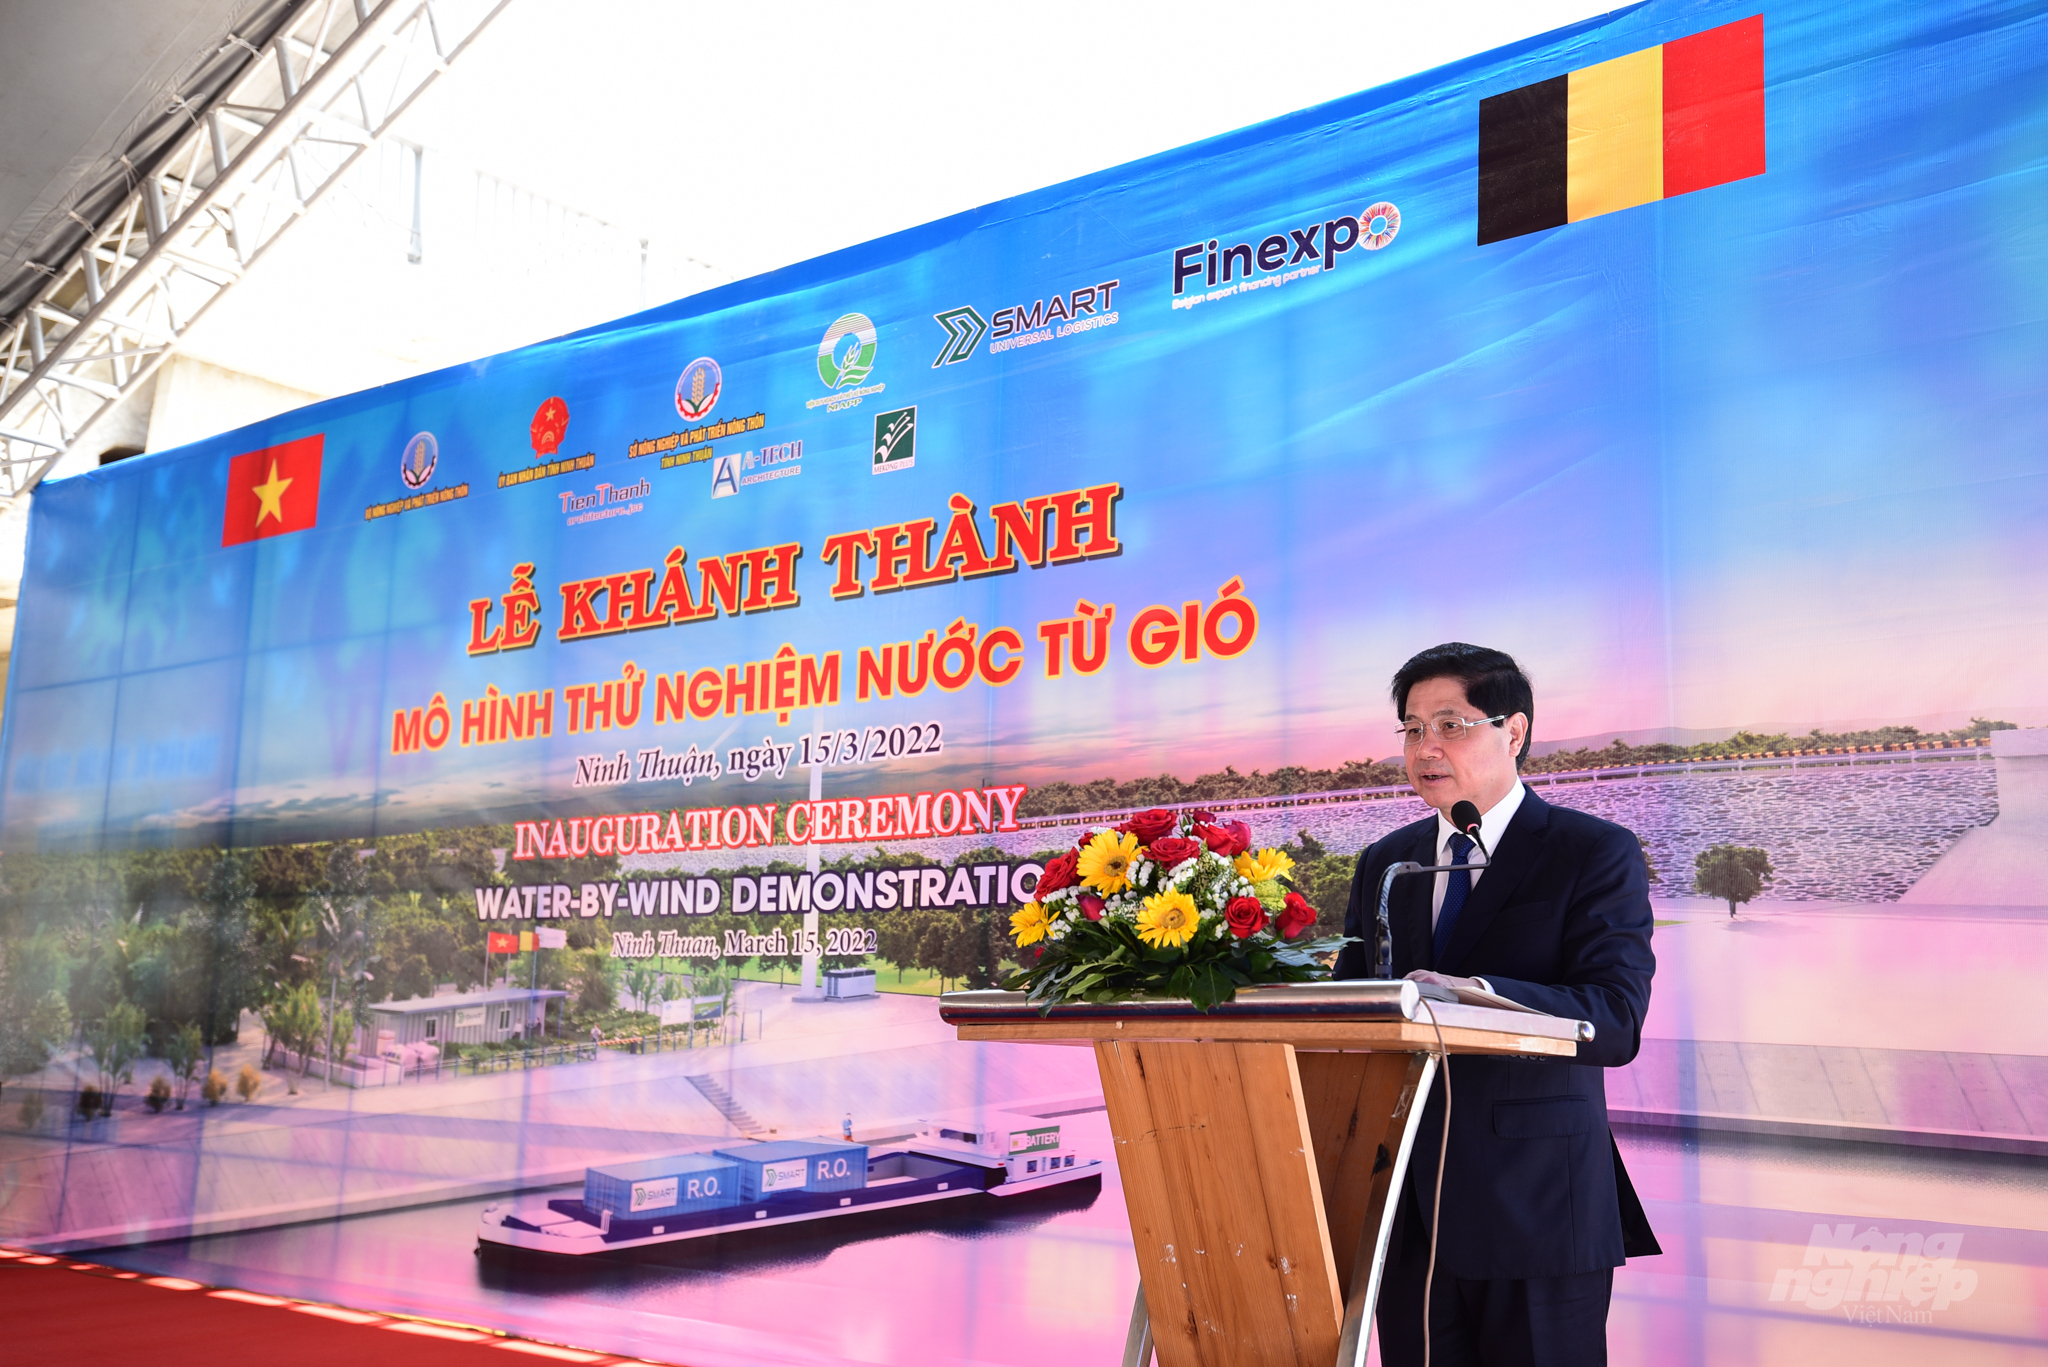 Deputy Minister Le Quoc Doanh highly appreciated the desalination capacity and mobility of the project model 'Water by Wind demonstration' in Ninh Thuan. Photo: Tung Dinh.